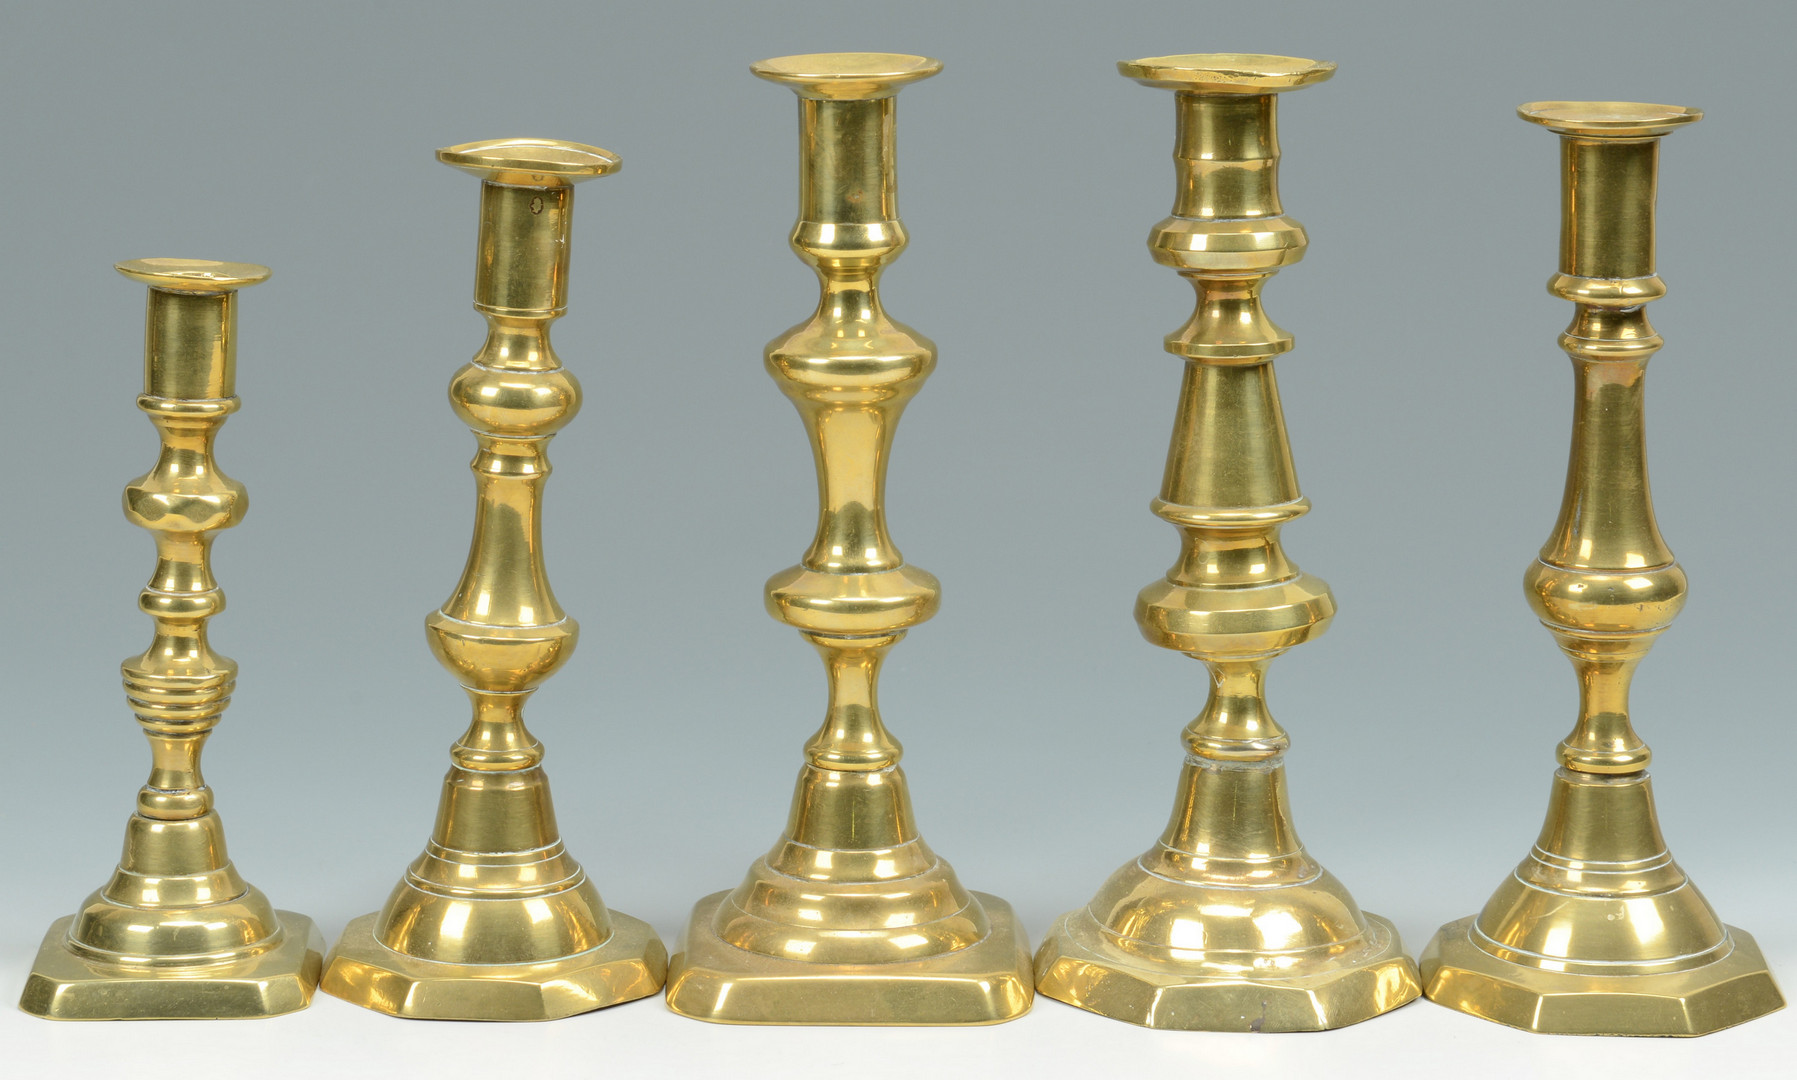 Lot 705: Grouping of Brass Candlesticks, 15 total